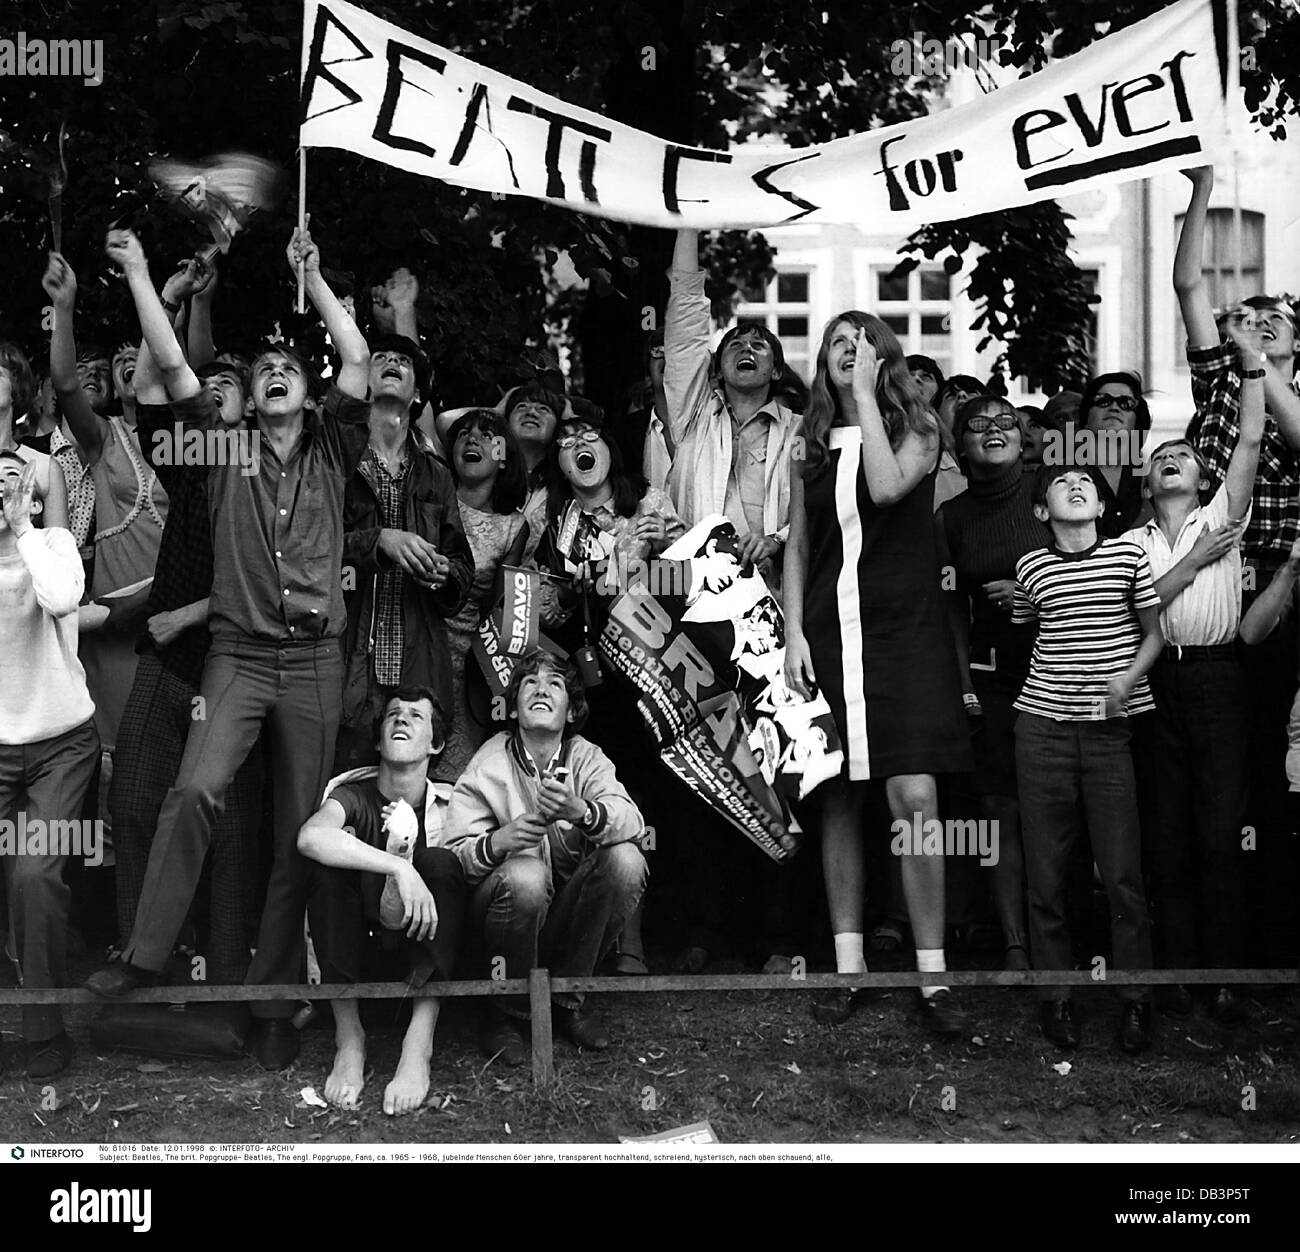 Leute, Jugendliche, Beatles-Fans am Straßenrand, Bravo Blitz Tour, München, 24.6.1966, Additional-Rights-Clearences-not available Stockfoto